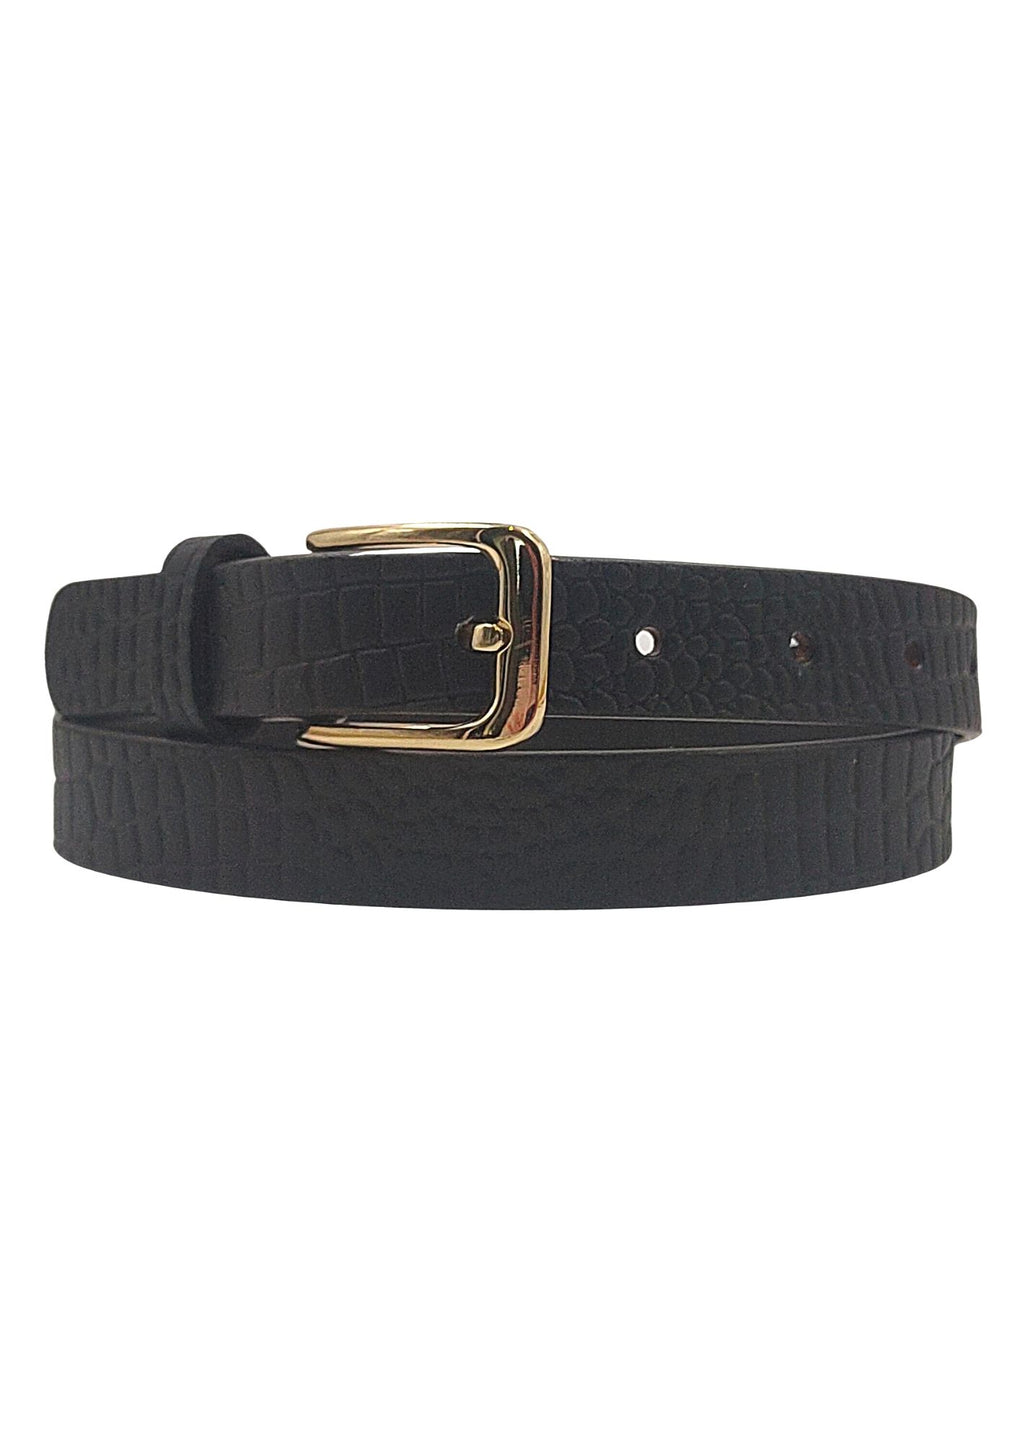 Croco Leather Belt With Golden Buckle (LB-1002_Black)